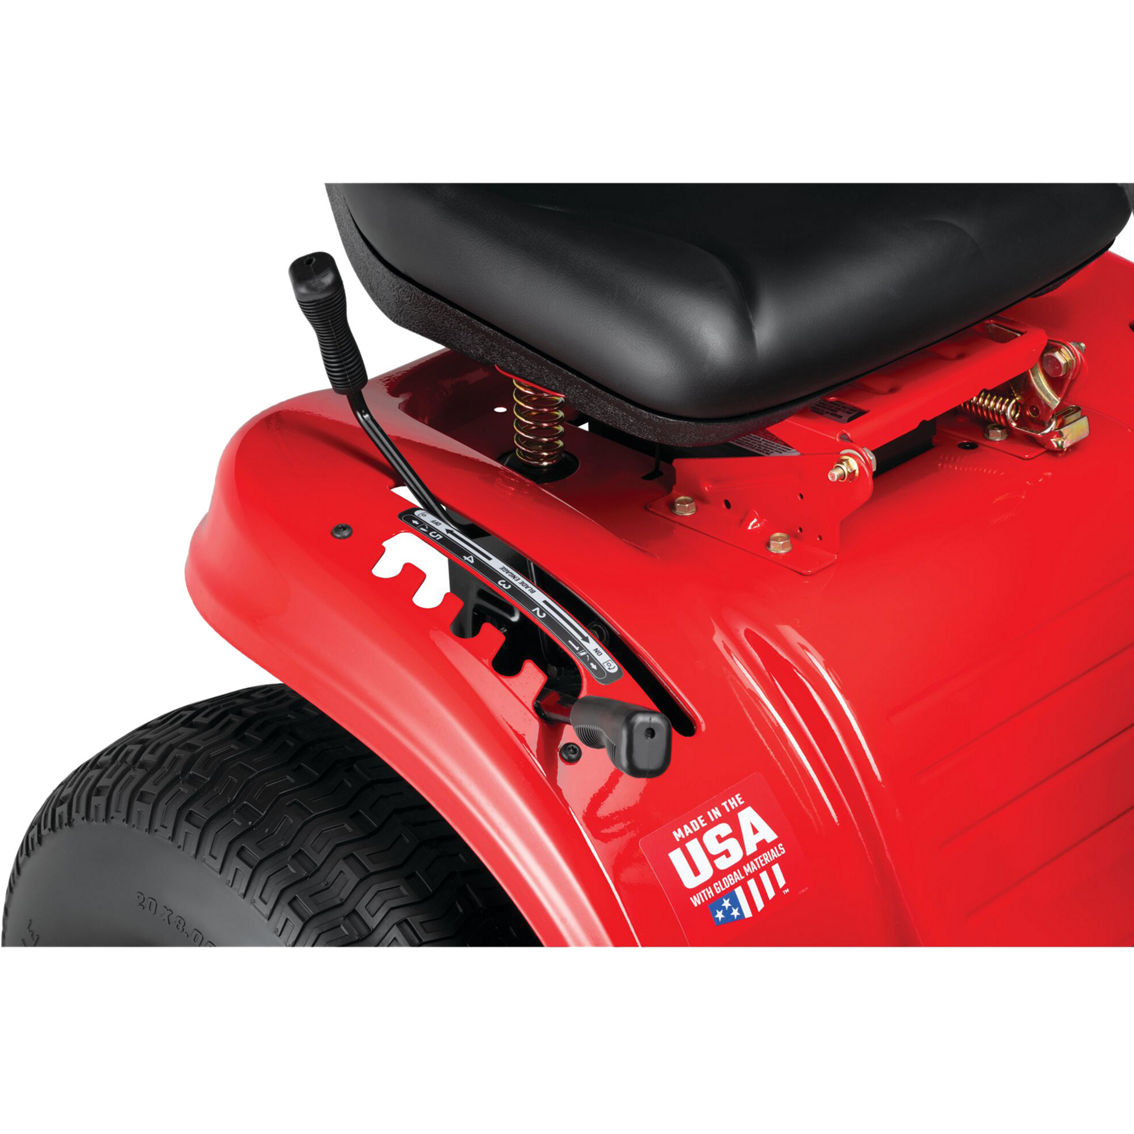 Craftsman 42-in. 17.5 HP Gas Riding Mower - Image 4 of 5